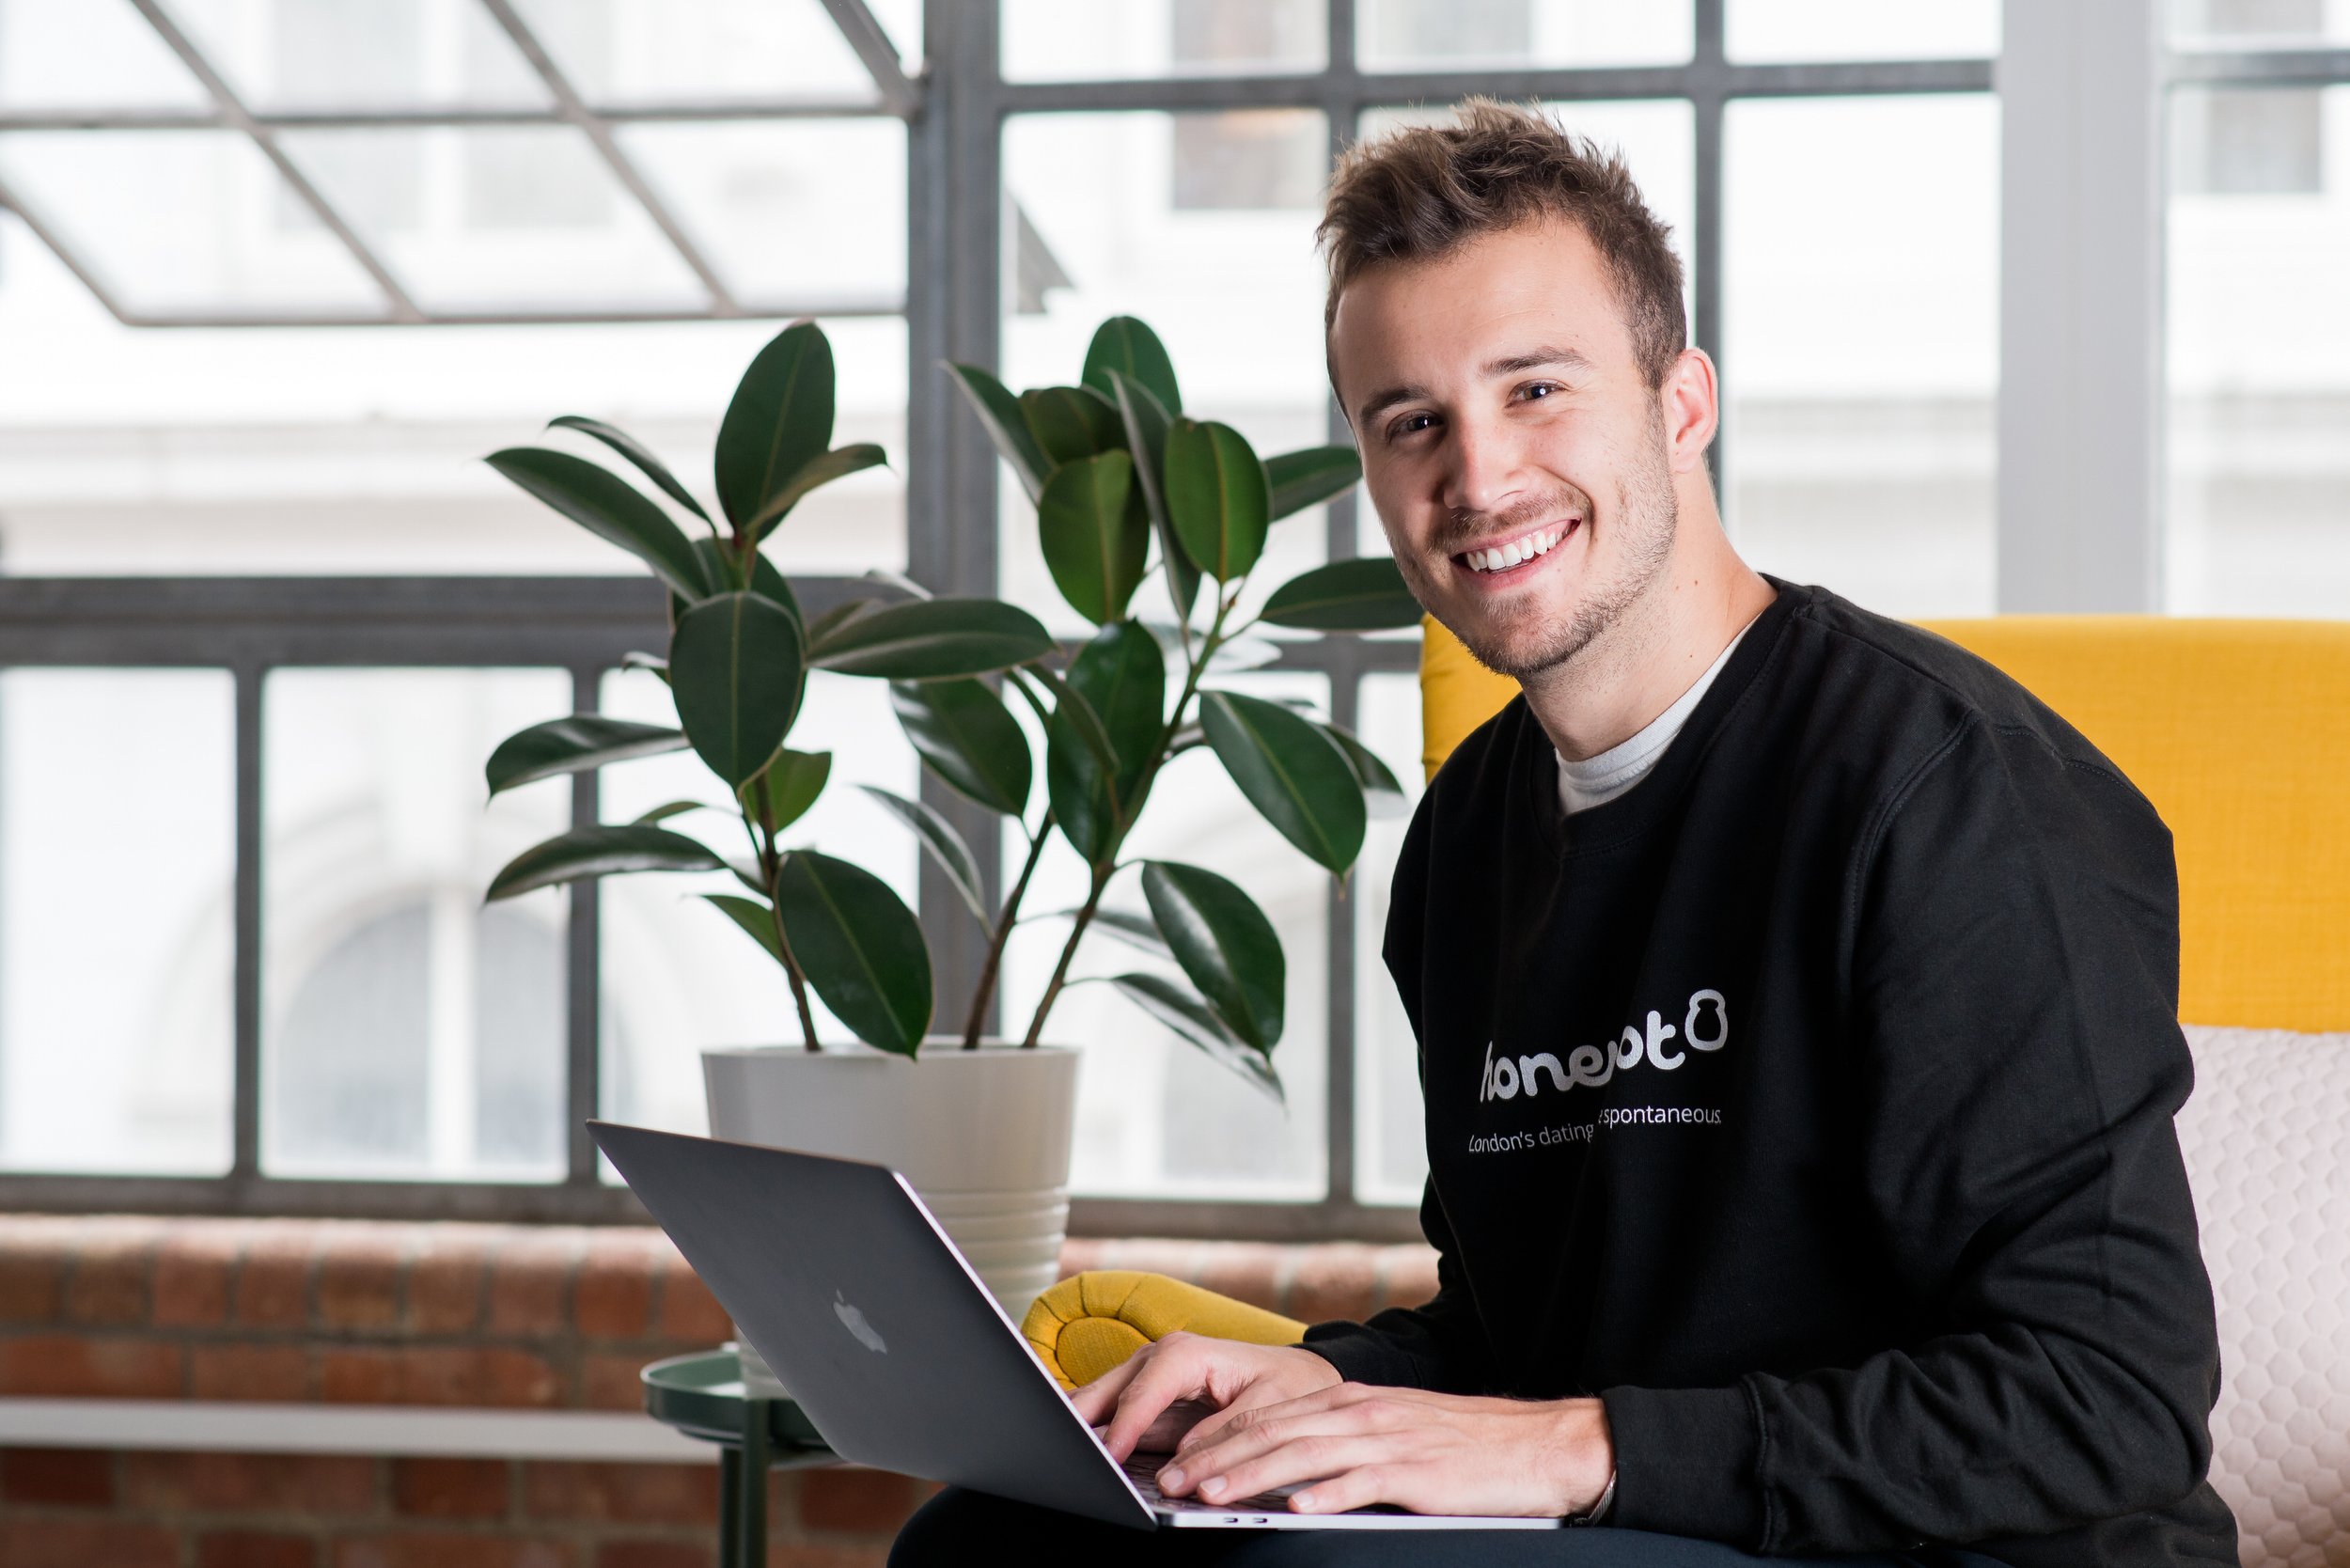  Young business man smiling  with a laptop on his lap. 